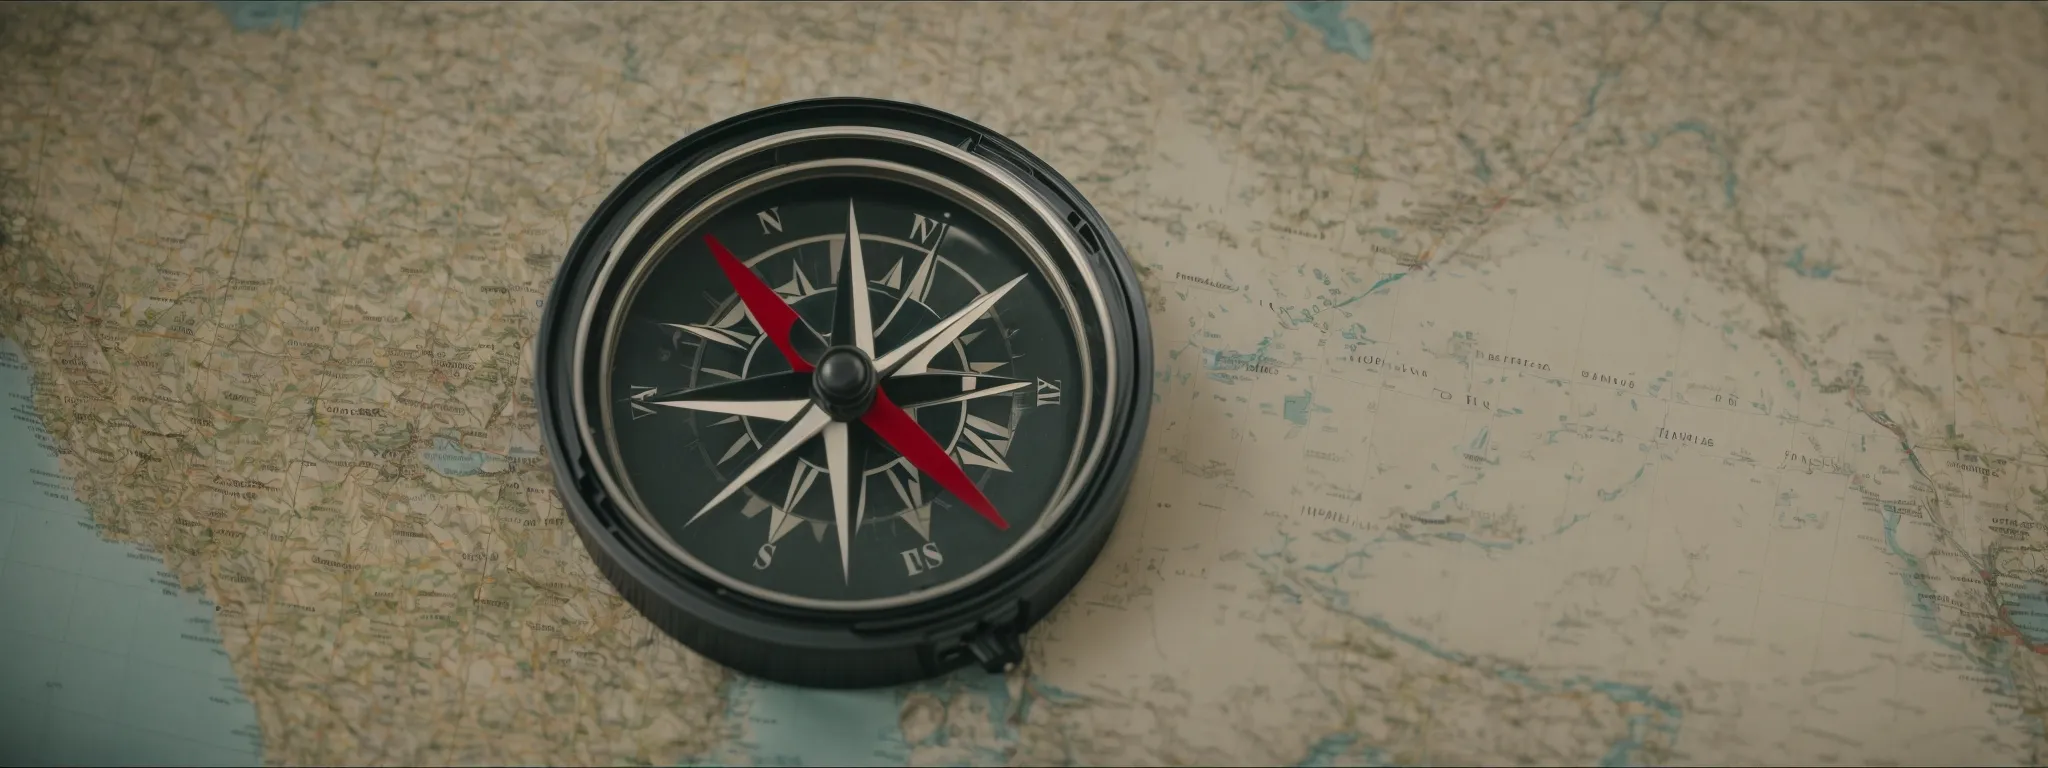 a compass on a map indicating directions and strategic pathways amidst digital symbols and graphs.